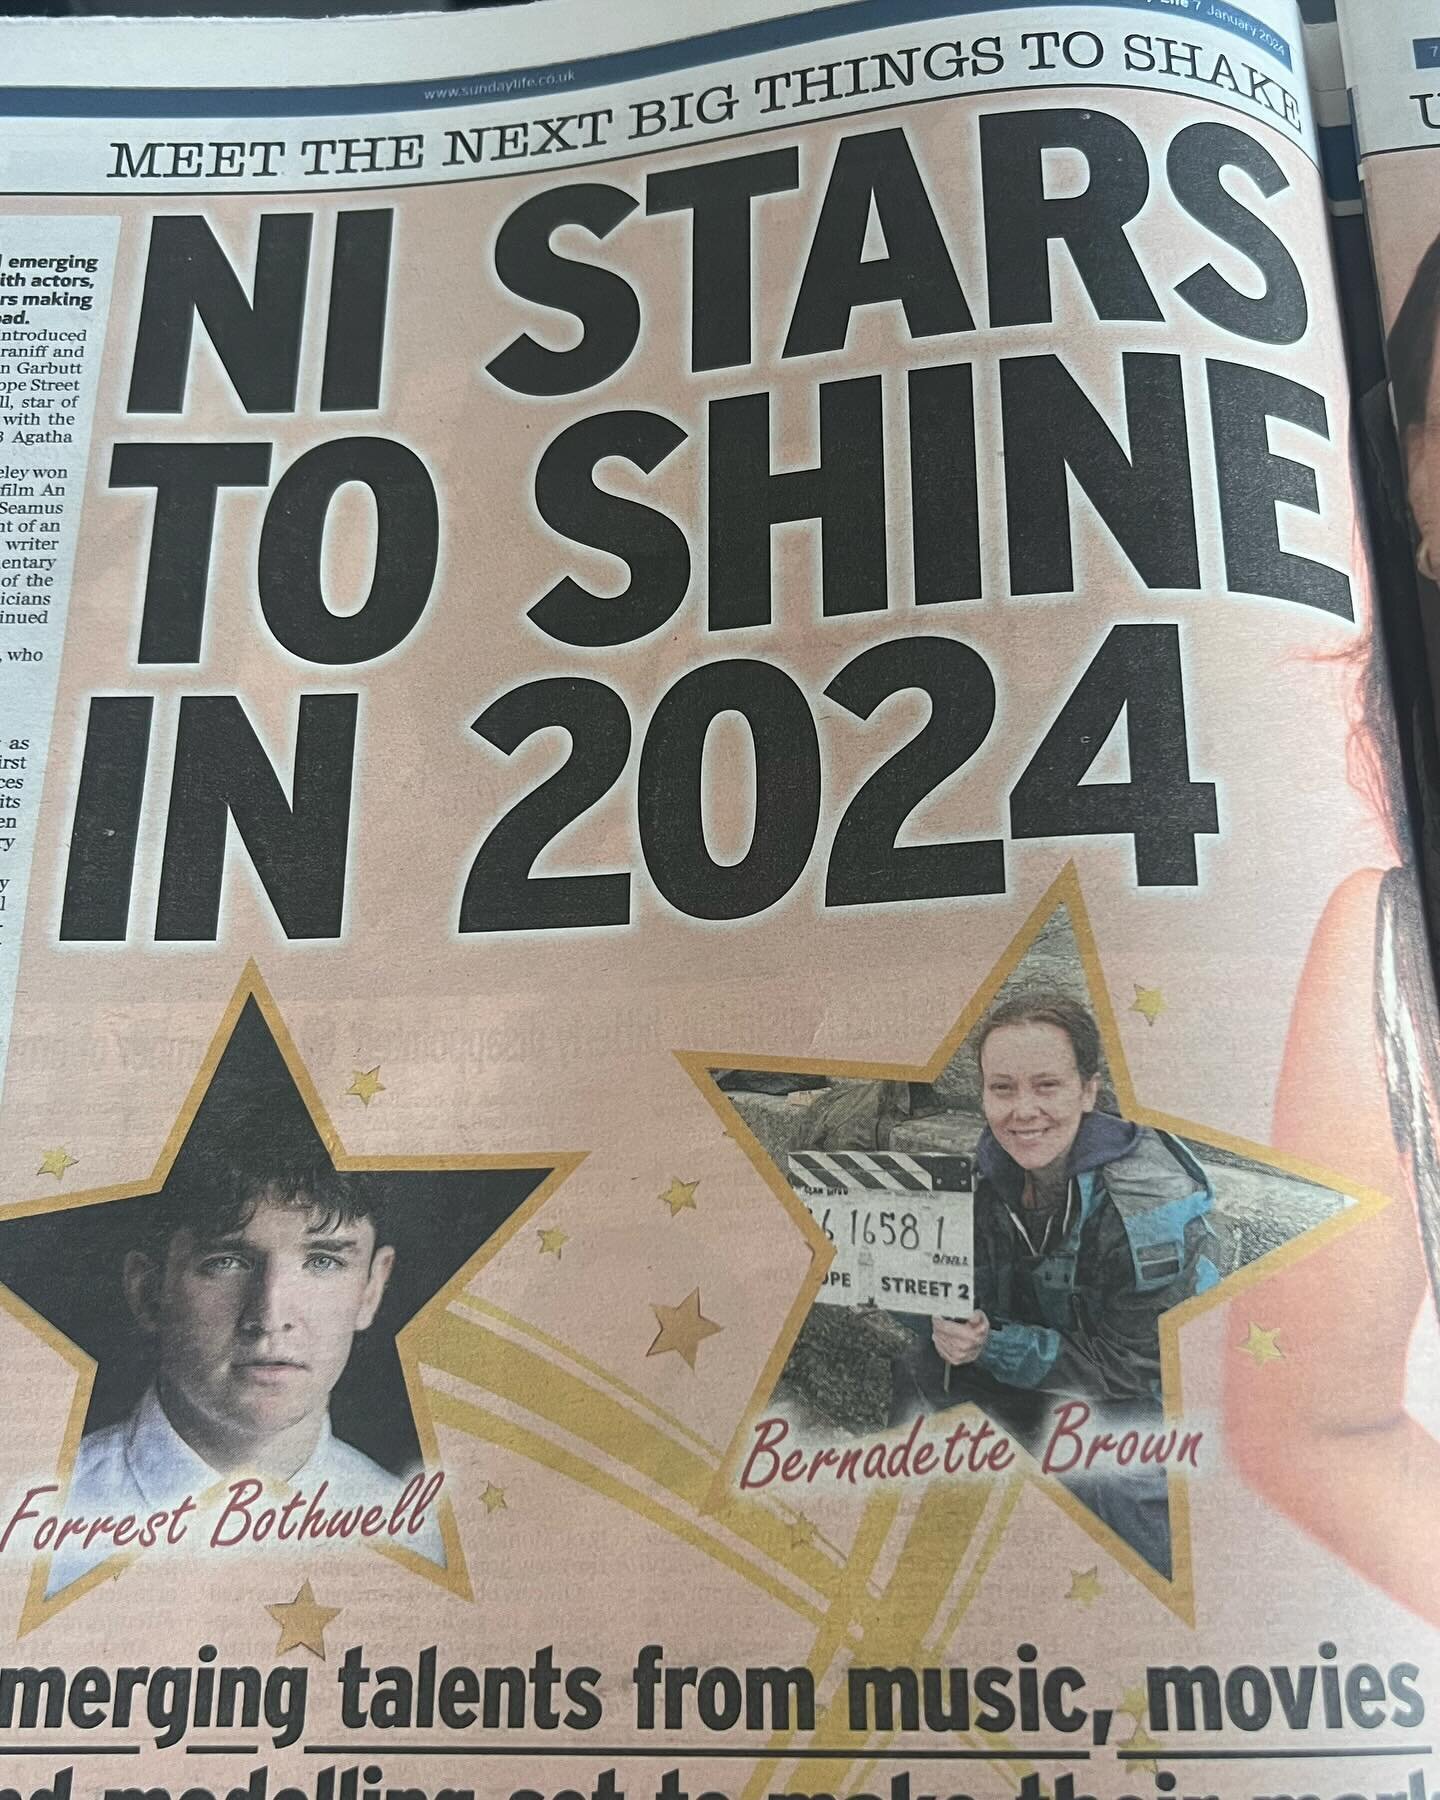 Have you seen today&rsquo;s Sunday Life feature about &lsquo;NI Stars to Shine in 2024&rsquo;? Our Matthew gets a mention for his amazing upcoming role and we are all just so proud of him! Definitely a rising little star! #casting #childactor #sunday